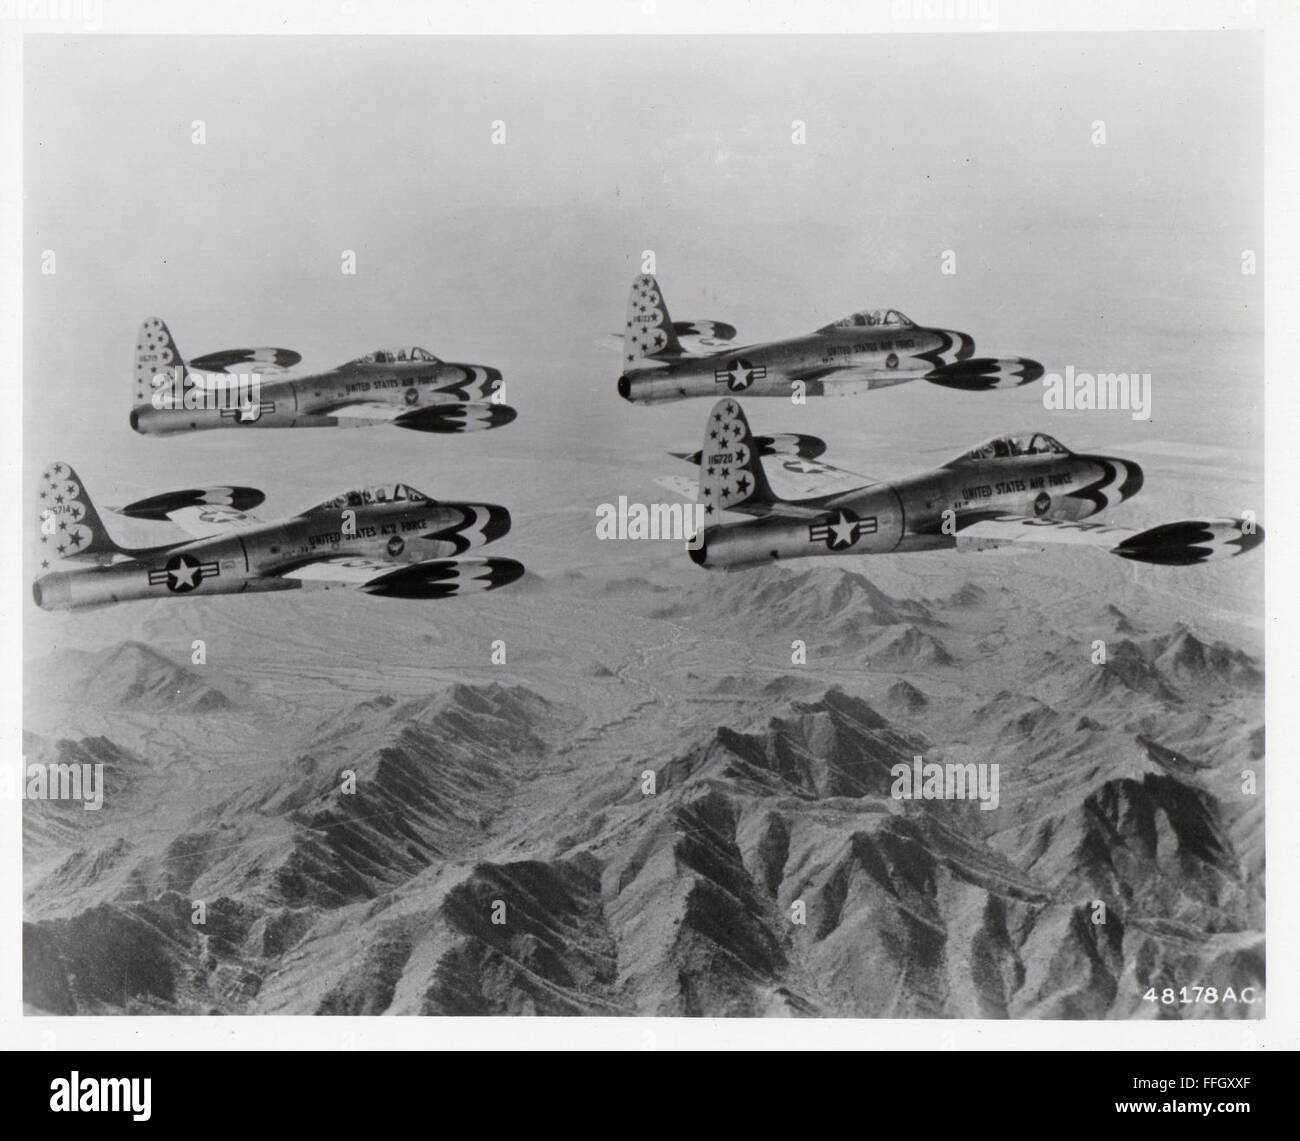 Thunderbirds F-84G Thunderjets fly in formation. The team utilized the “G” model from 1953 to 1954.  The straight-wing configuration of the F-84G was considered well suited for aerobatic and demonstration maneuvers, though the aircraft could not exceed the speed of sound. Stock Photo